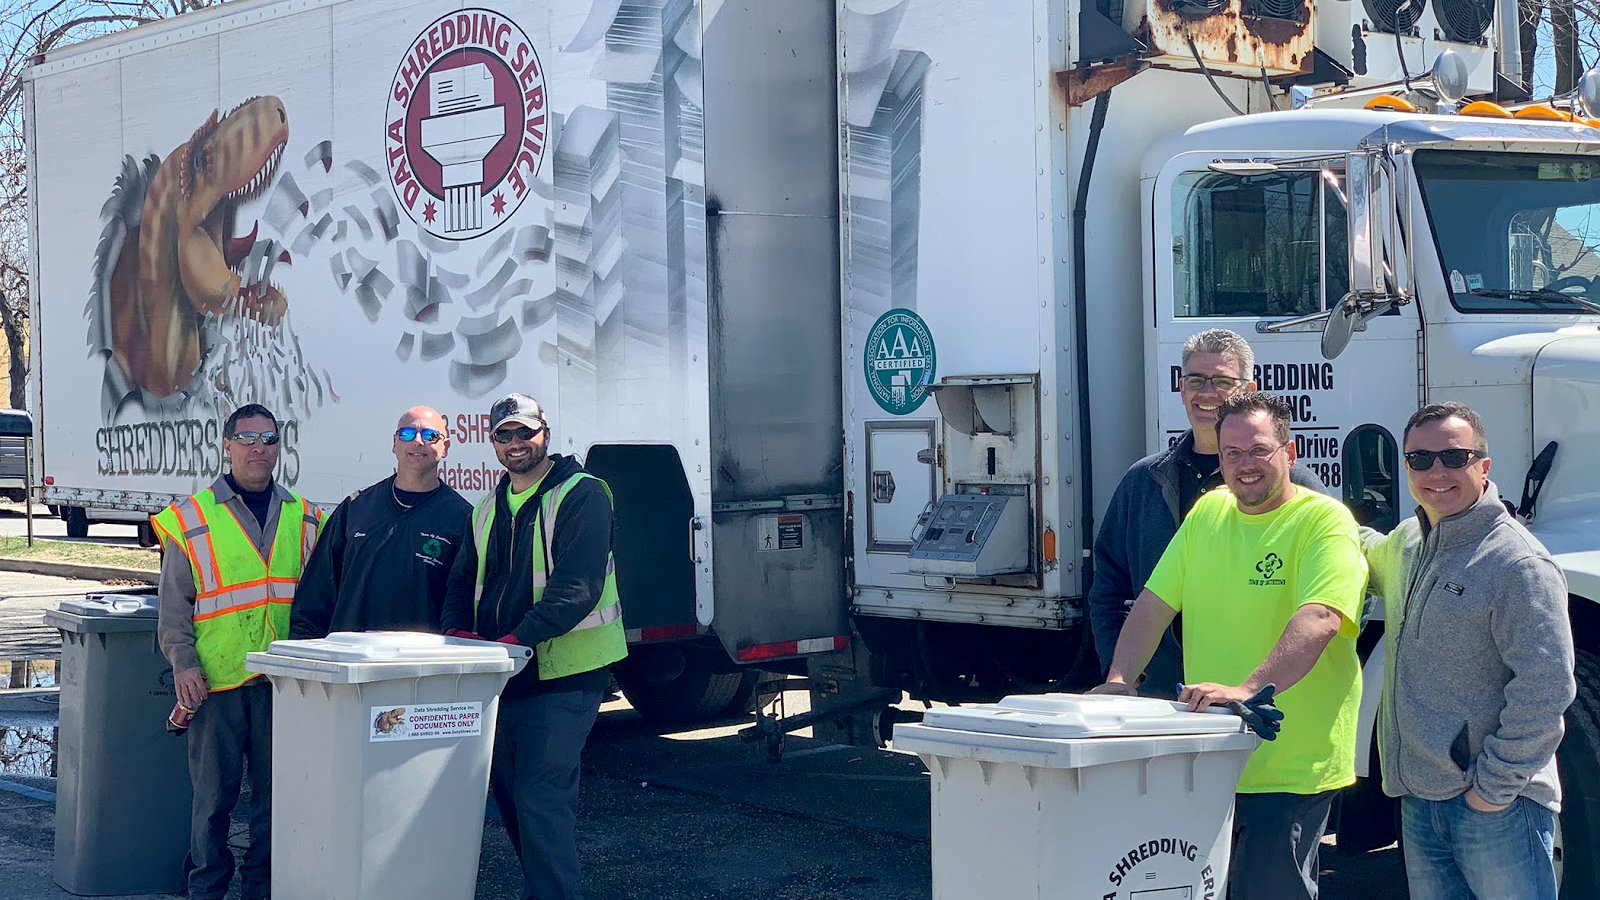 Safely shred sensitive documents at Smithtown shredding event The